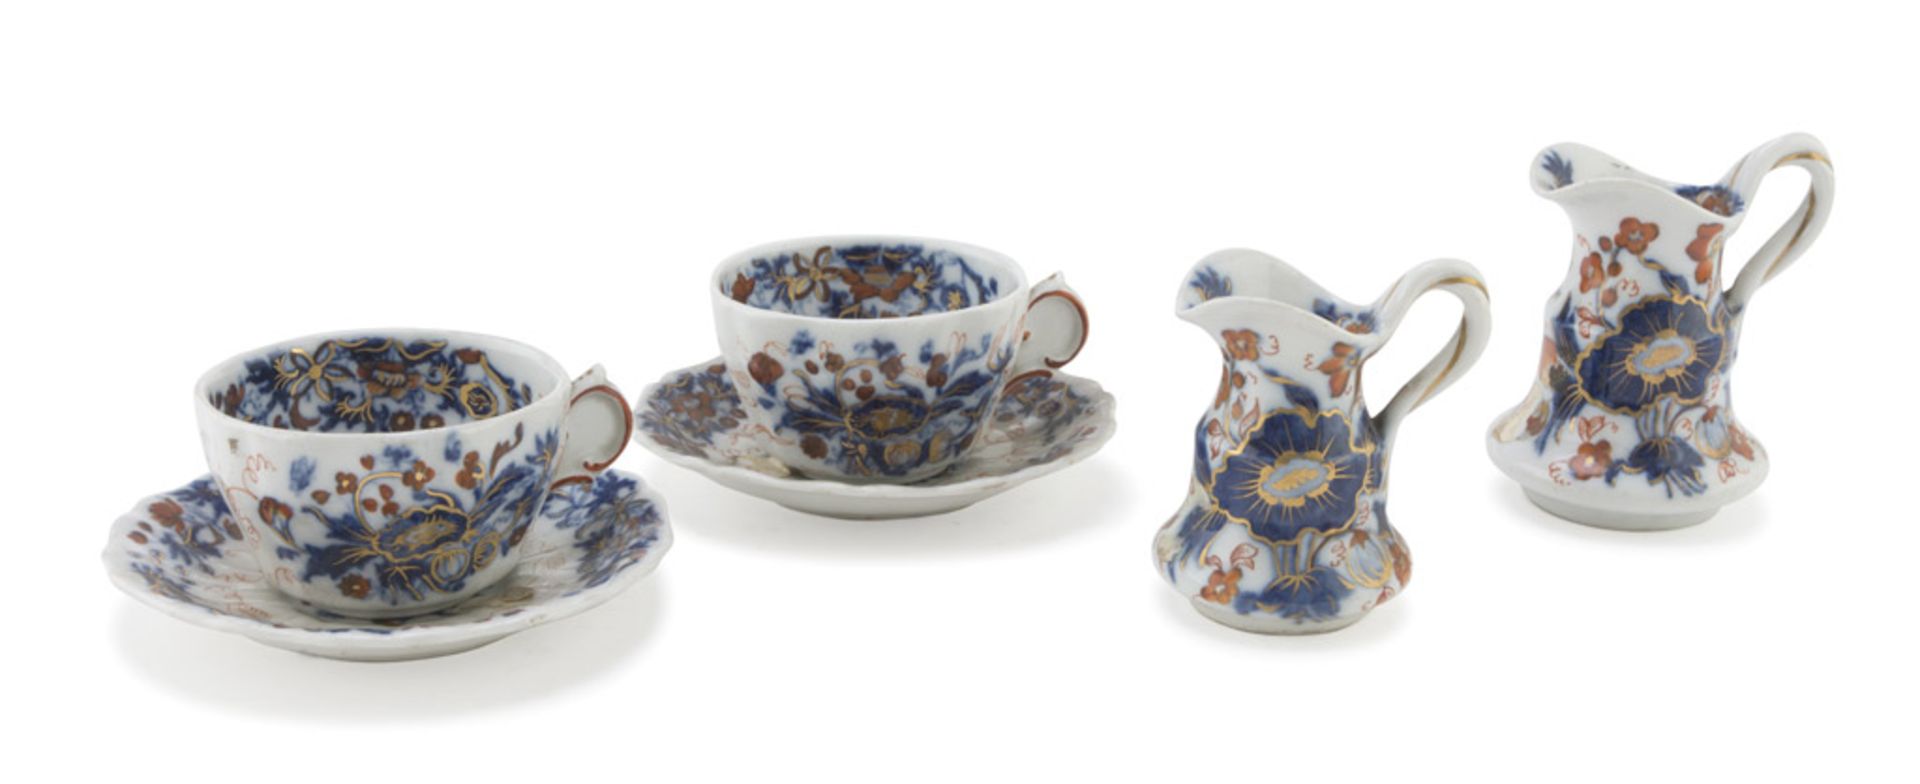 SMALL PORCELAIN SET, FRANCE 19TH CENTURY in cobalt, orange and gold enamel, with floral decorums.